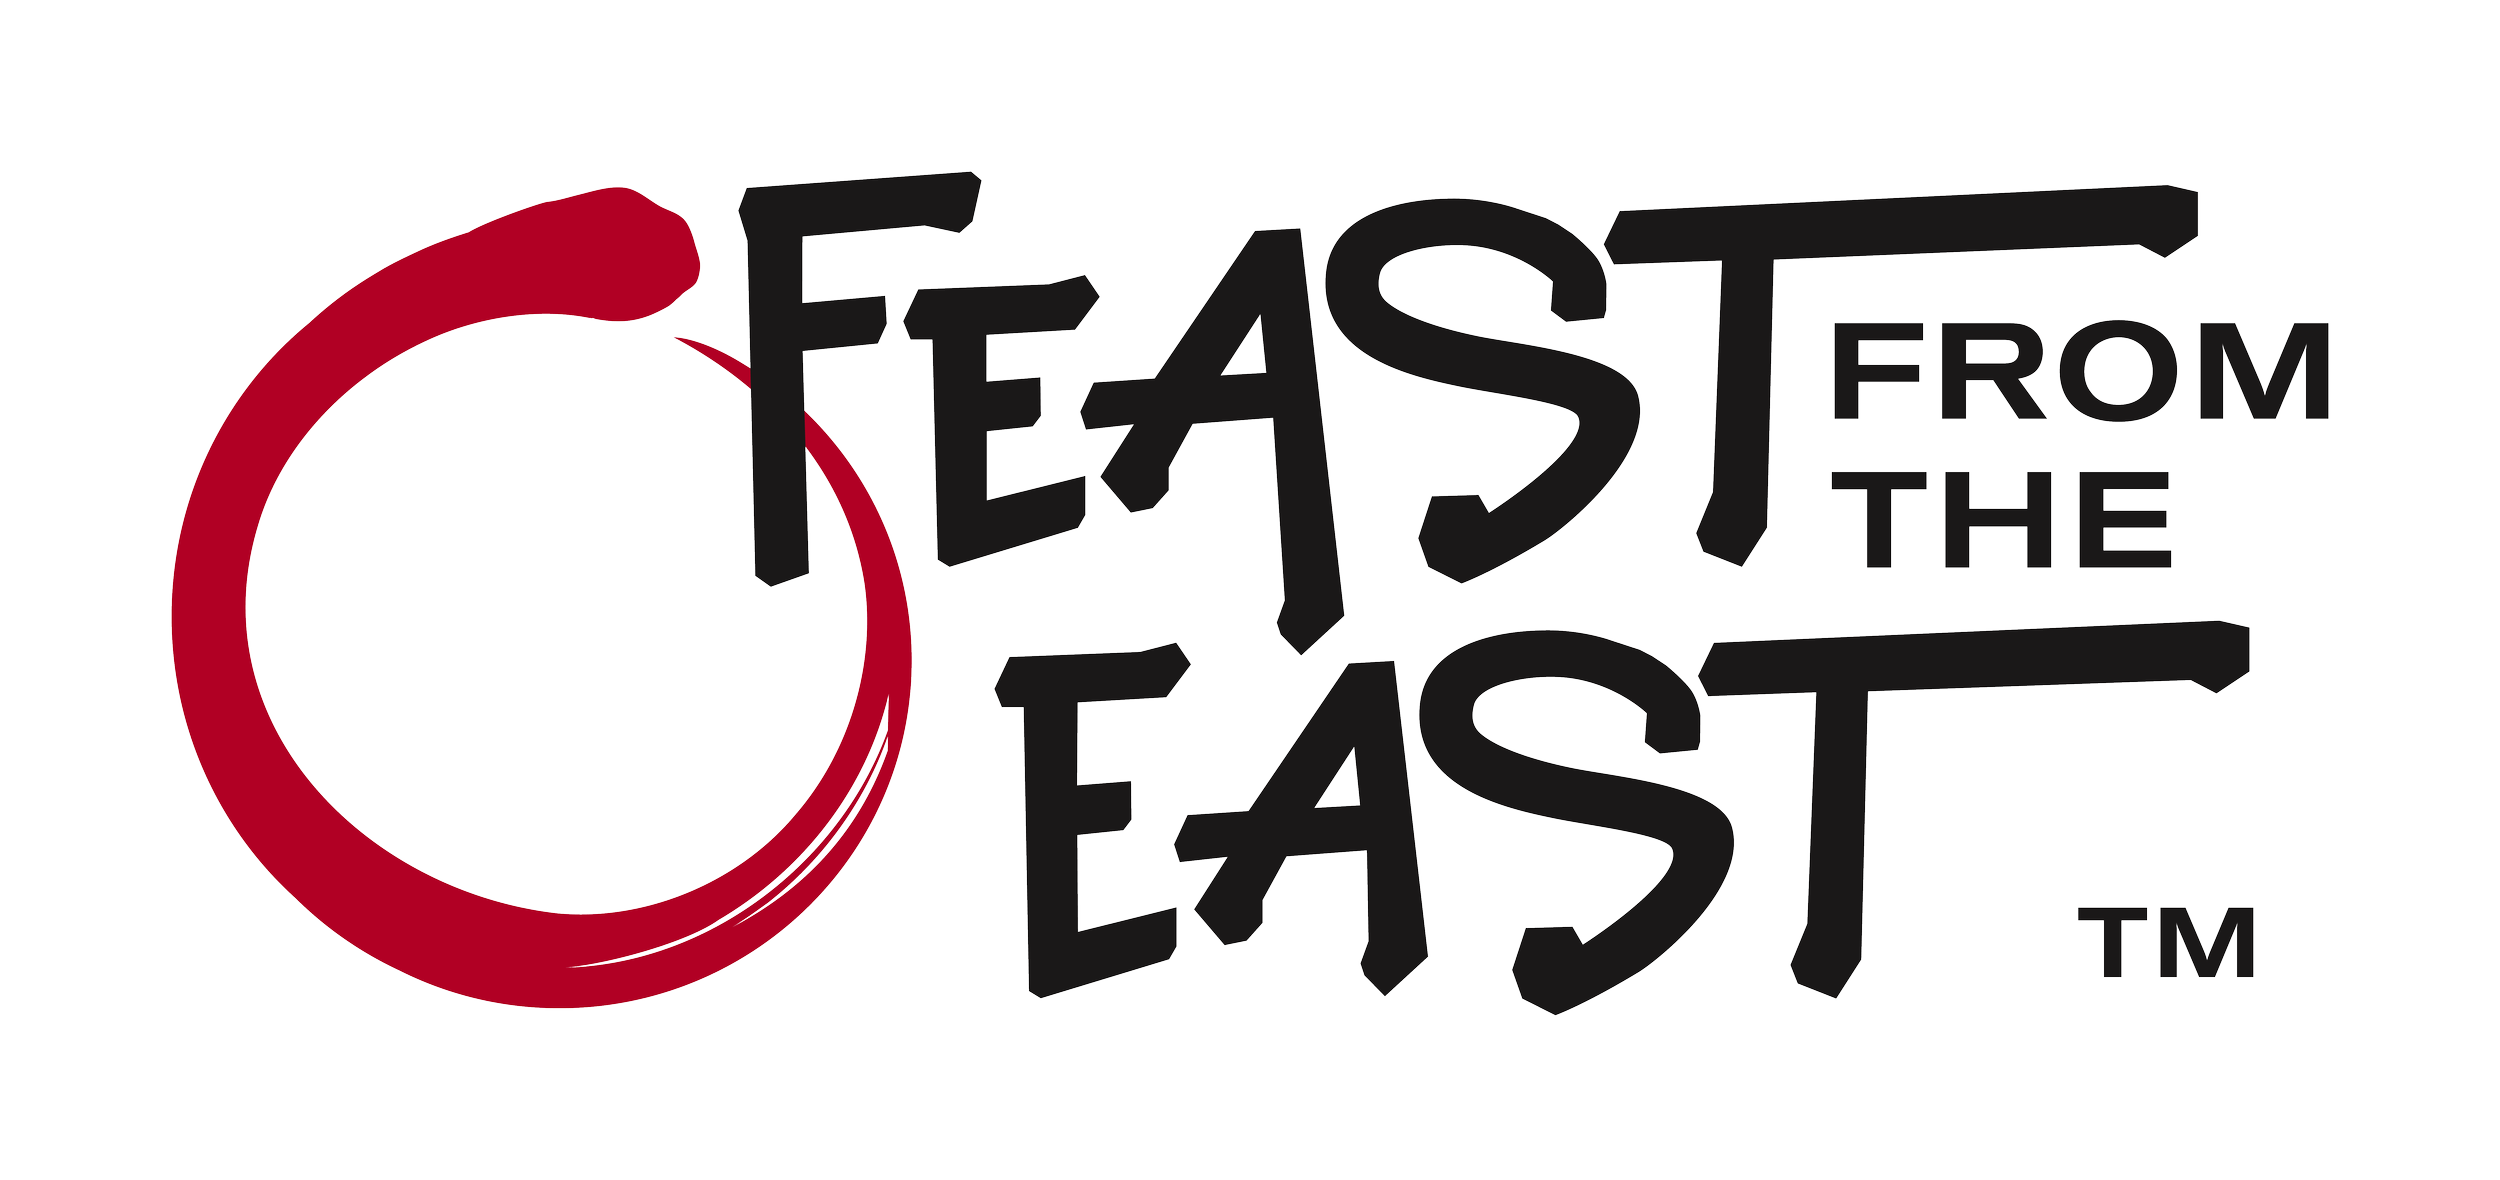 Feast From the East (Copy)